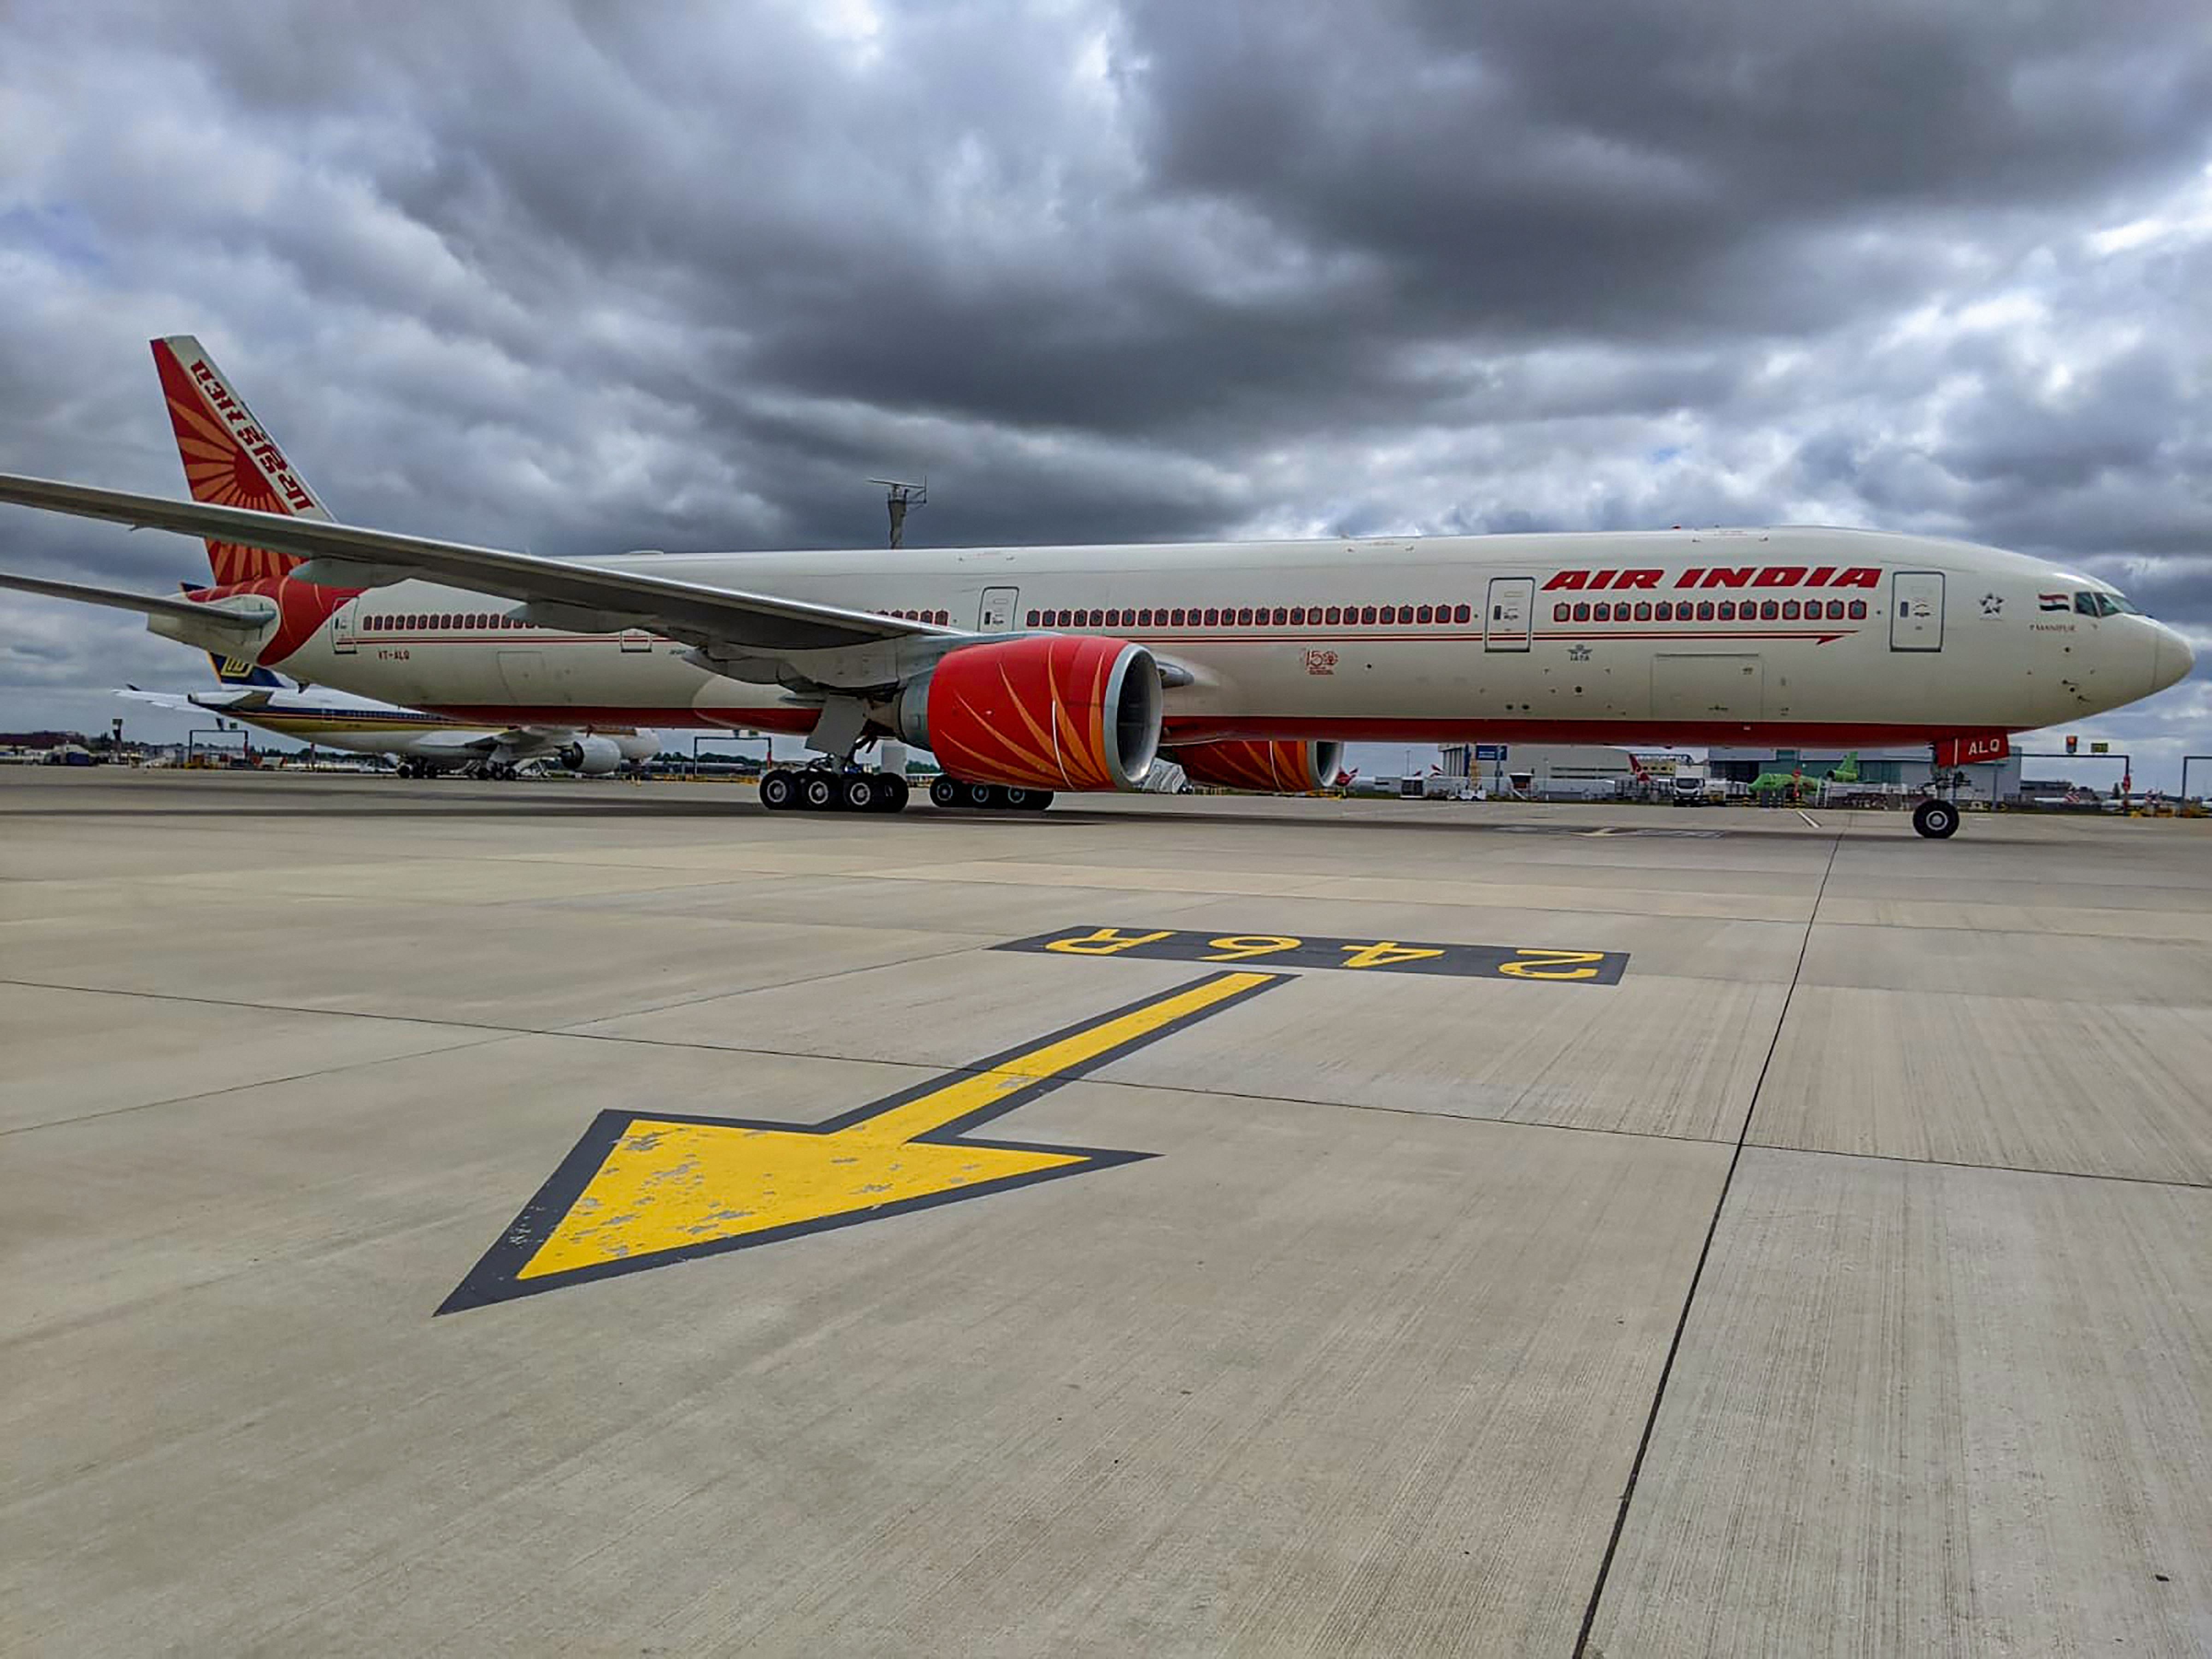 An Air India flight evacuating 327 stranded Indians took off from London for Ahmedabad (Gujarat) as part of government's 'Vande Bharat' mission, amid the ongoing coronavirus pandemic.. (PTI Photo)